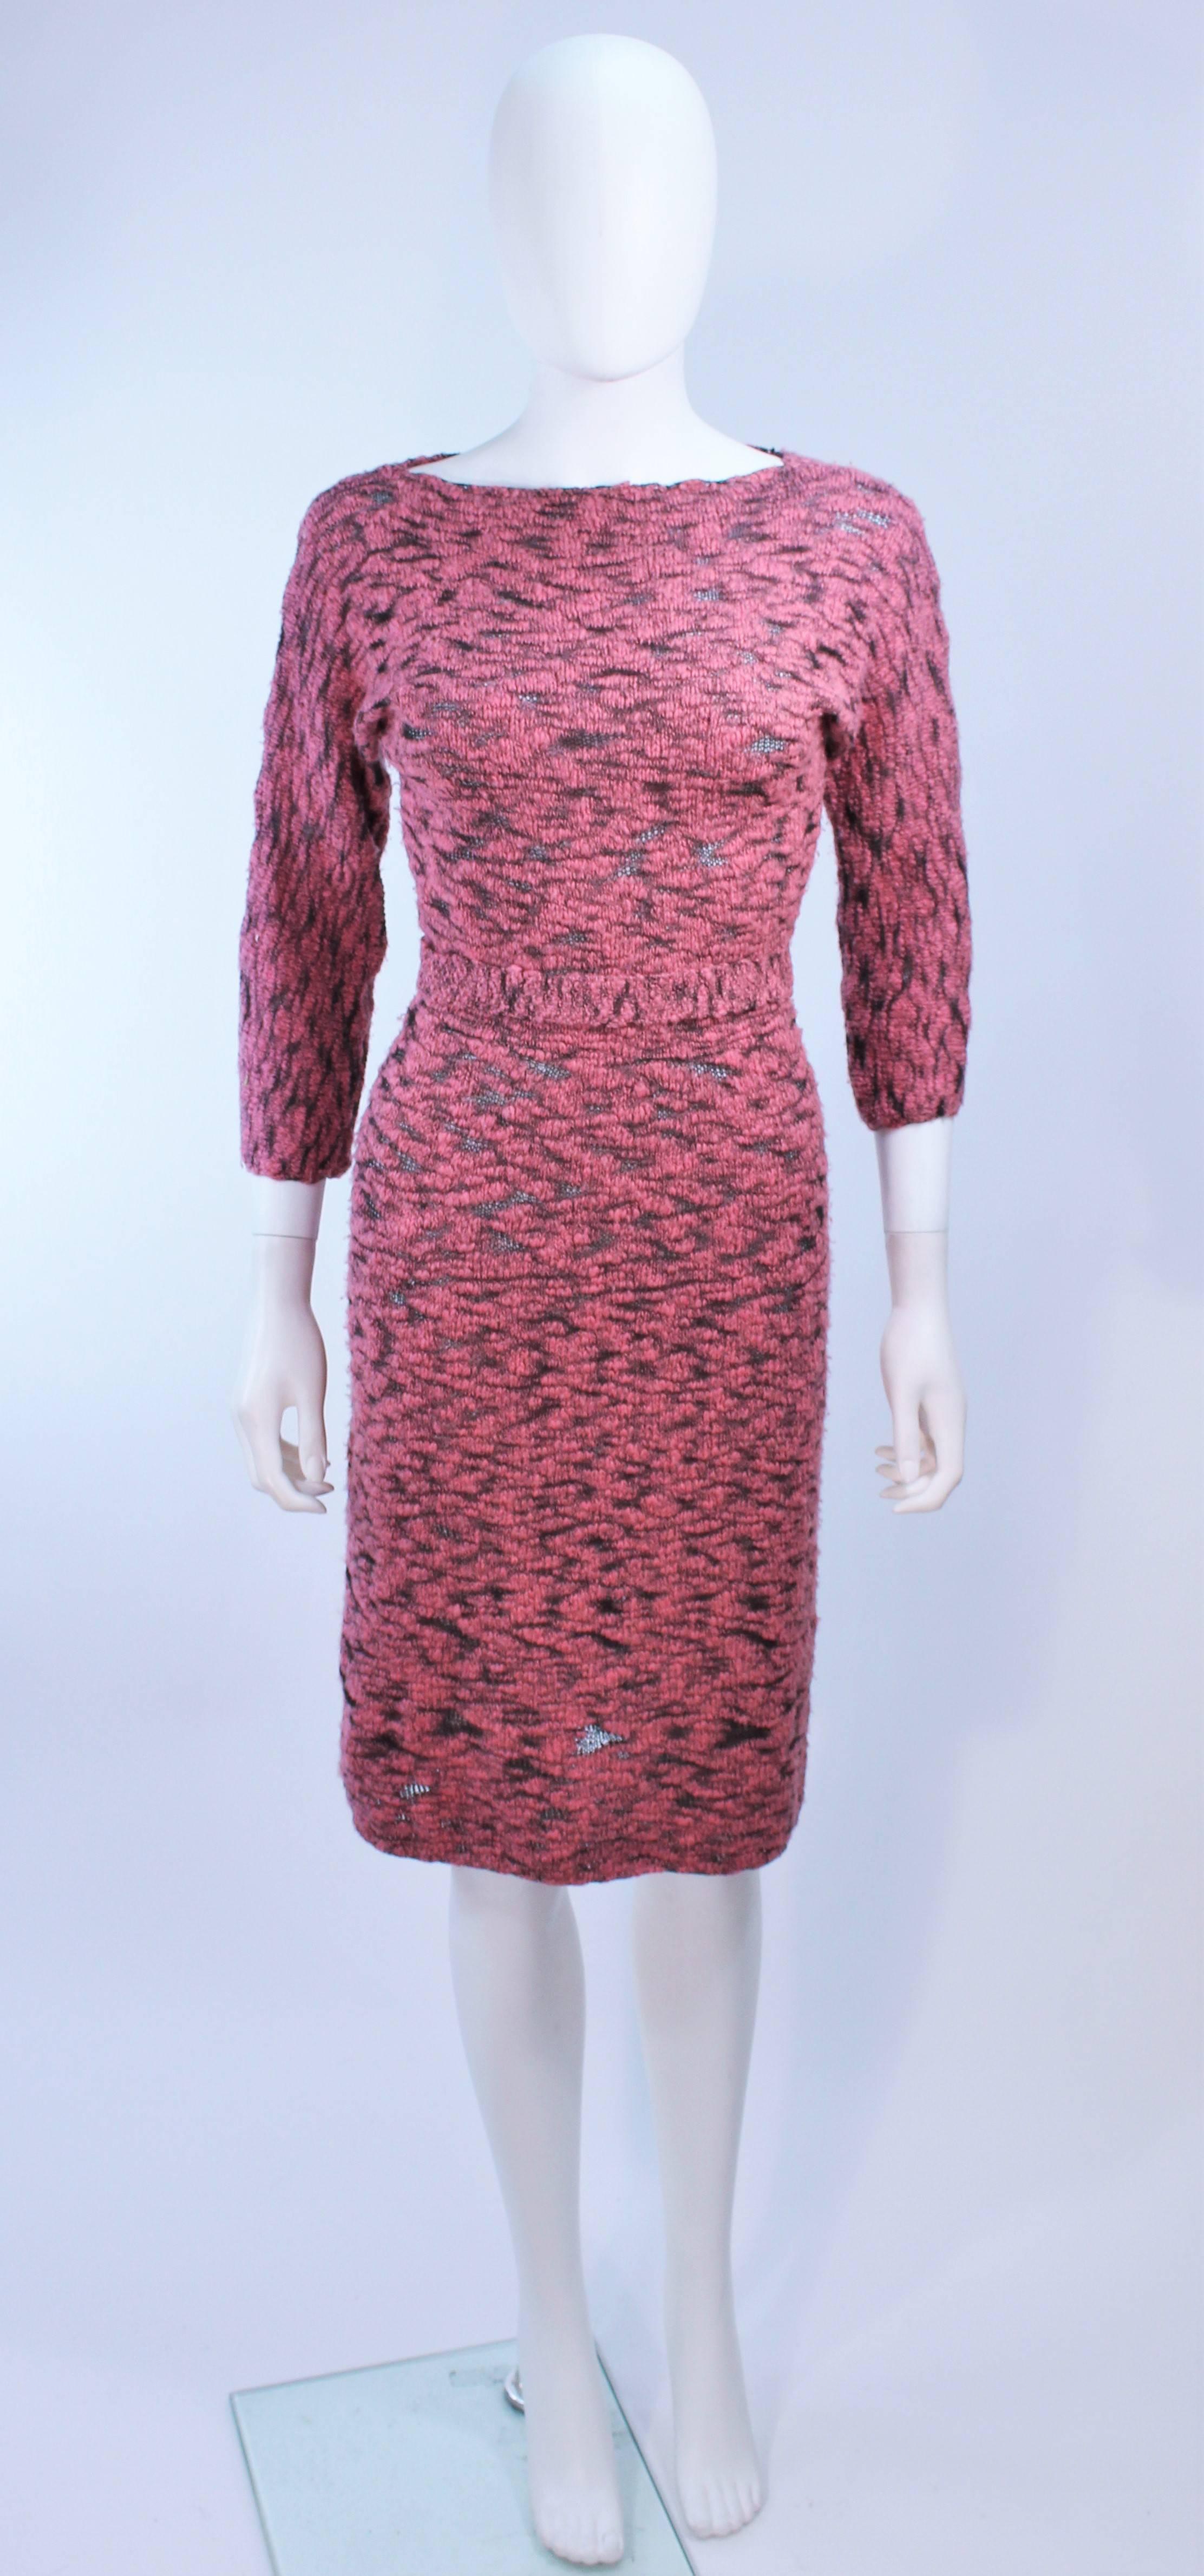 This Sydney's dress is composed of a stretch pink and black wool. Features a semi sheer design with belt. In excellent vintage condition.

**Please cross-reference measurements for personal accuracy. Size in description box is an